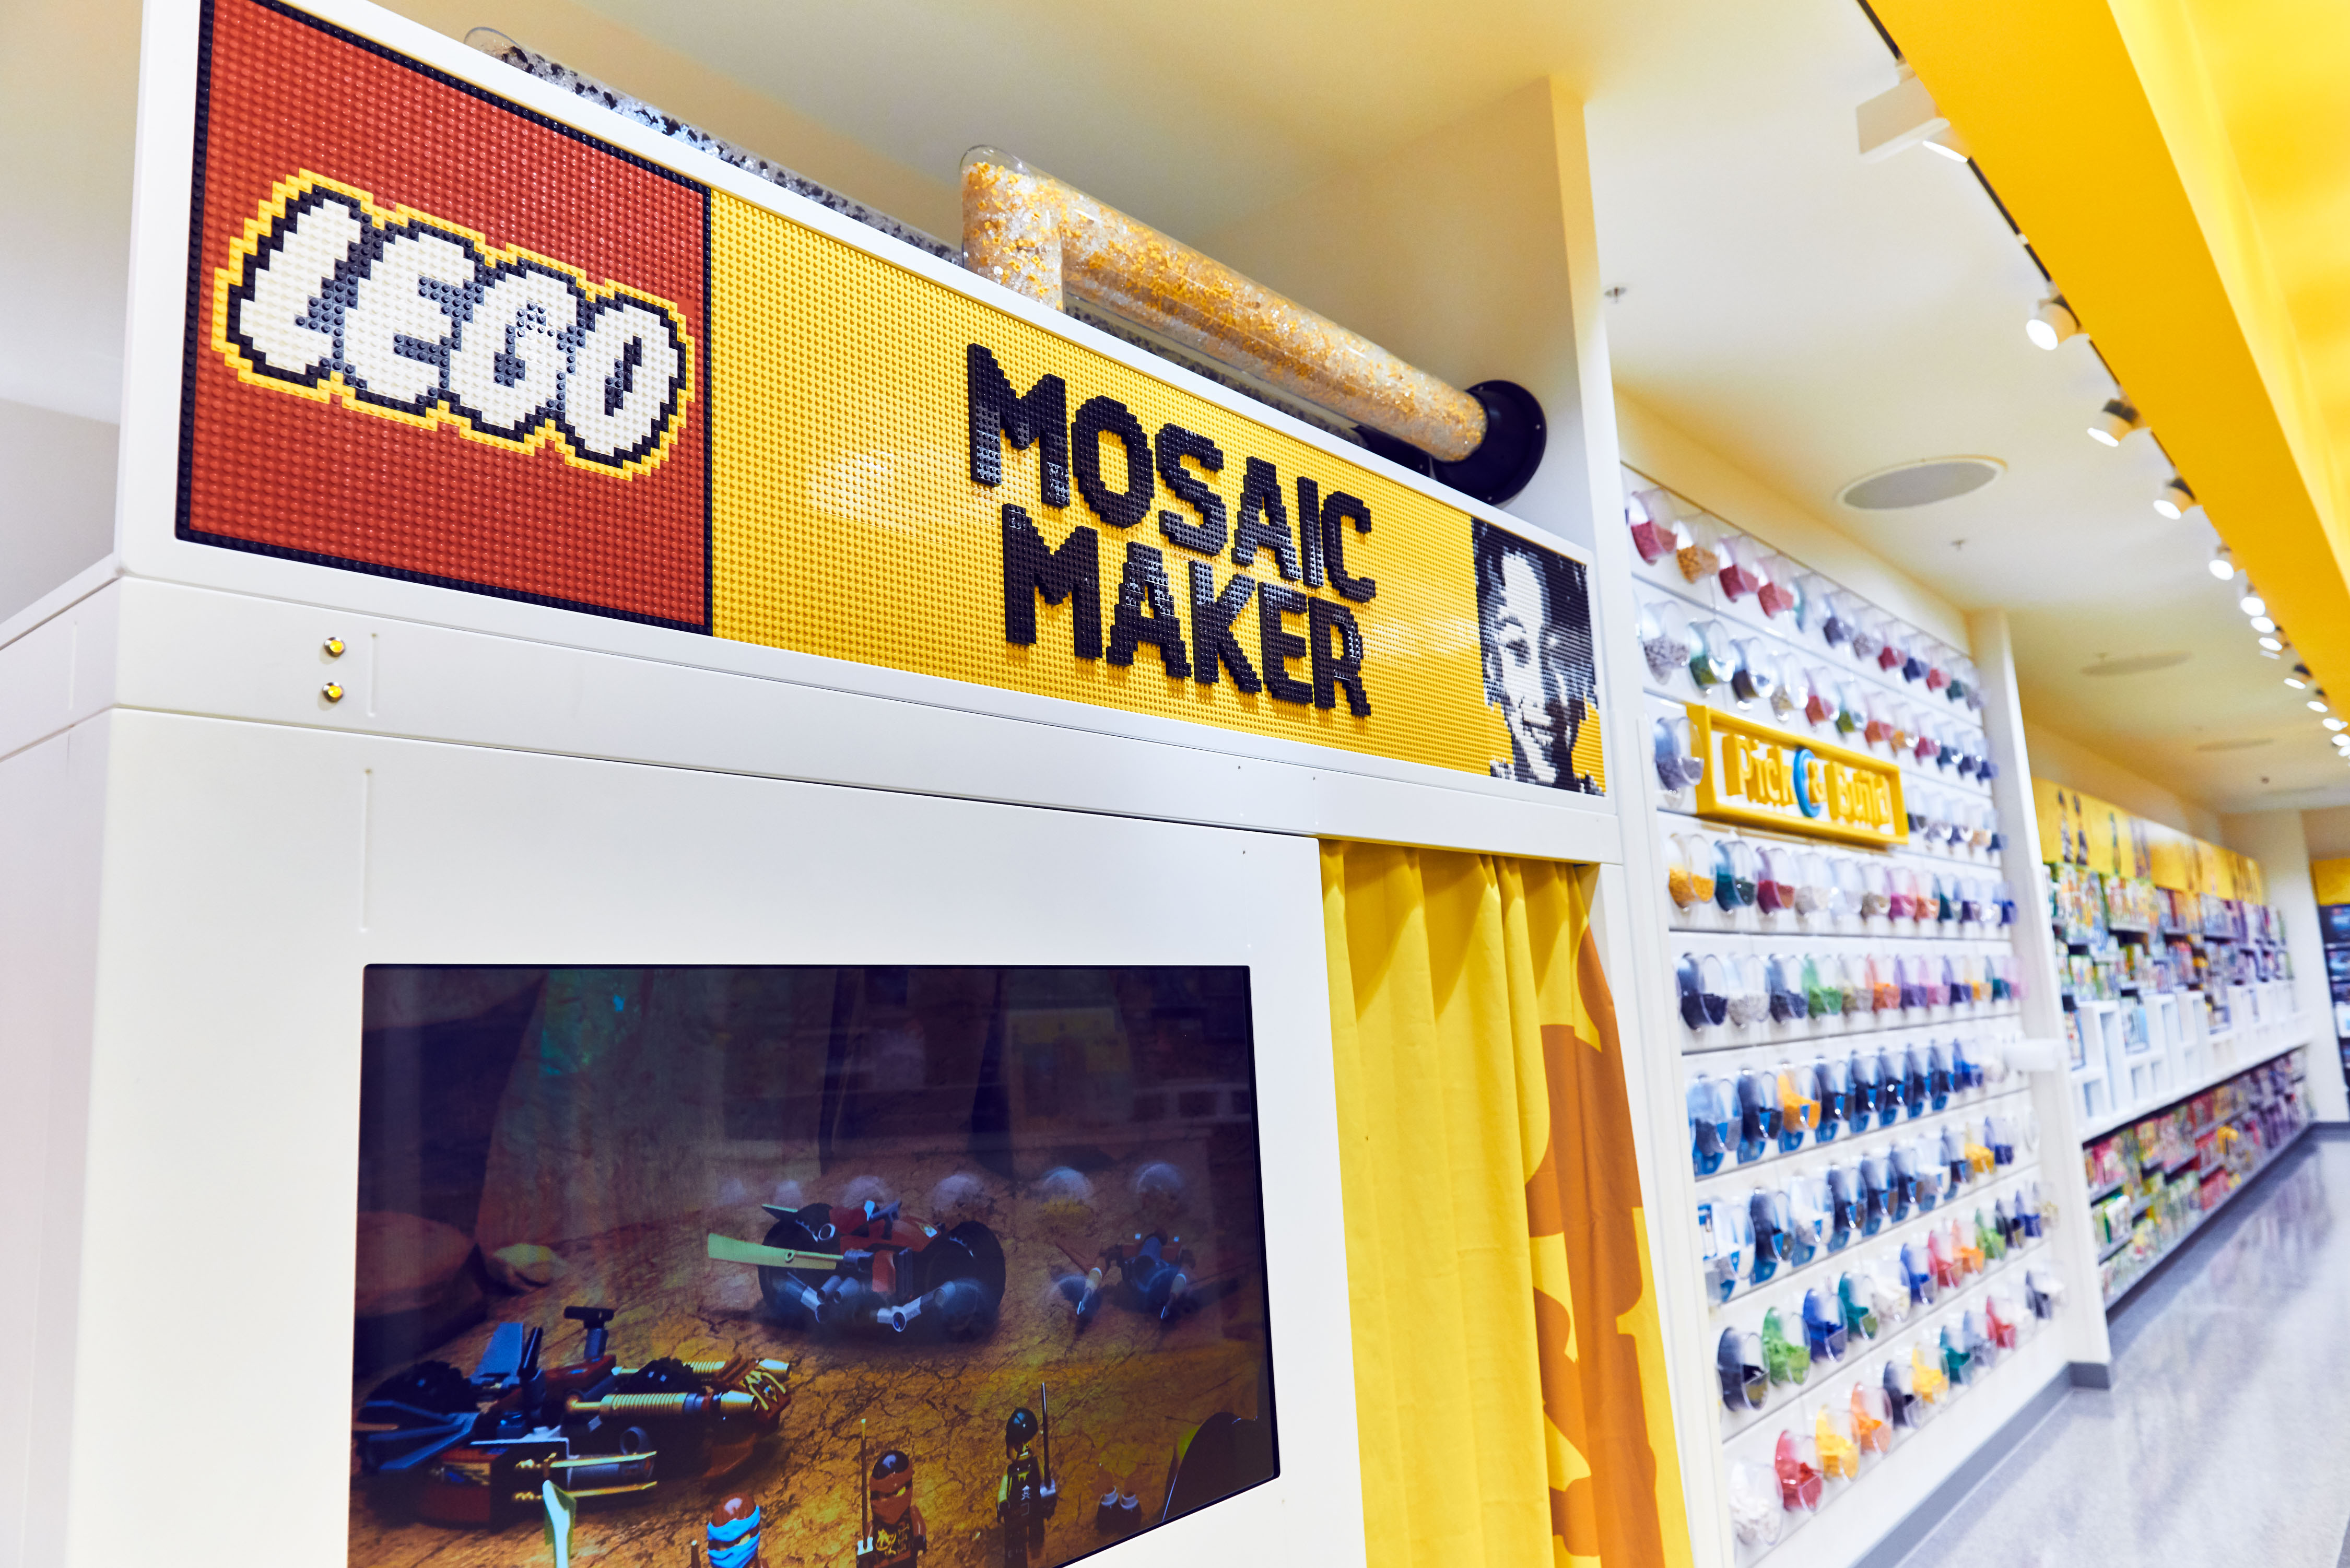 The "Mosaic Maker" offers Legos fans of all ages the opportunity to purchase their very own, one of a kind, personalized Legos mosaic portrait. (Lego)